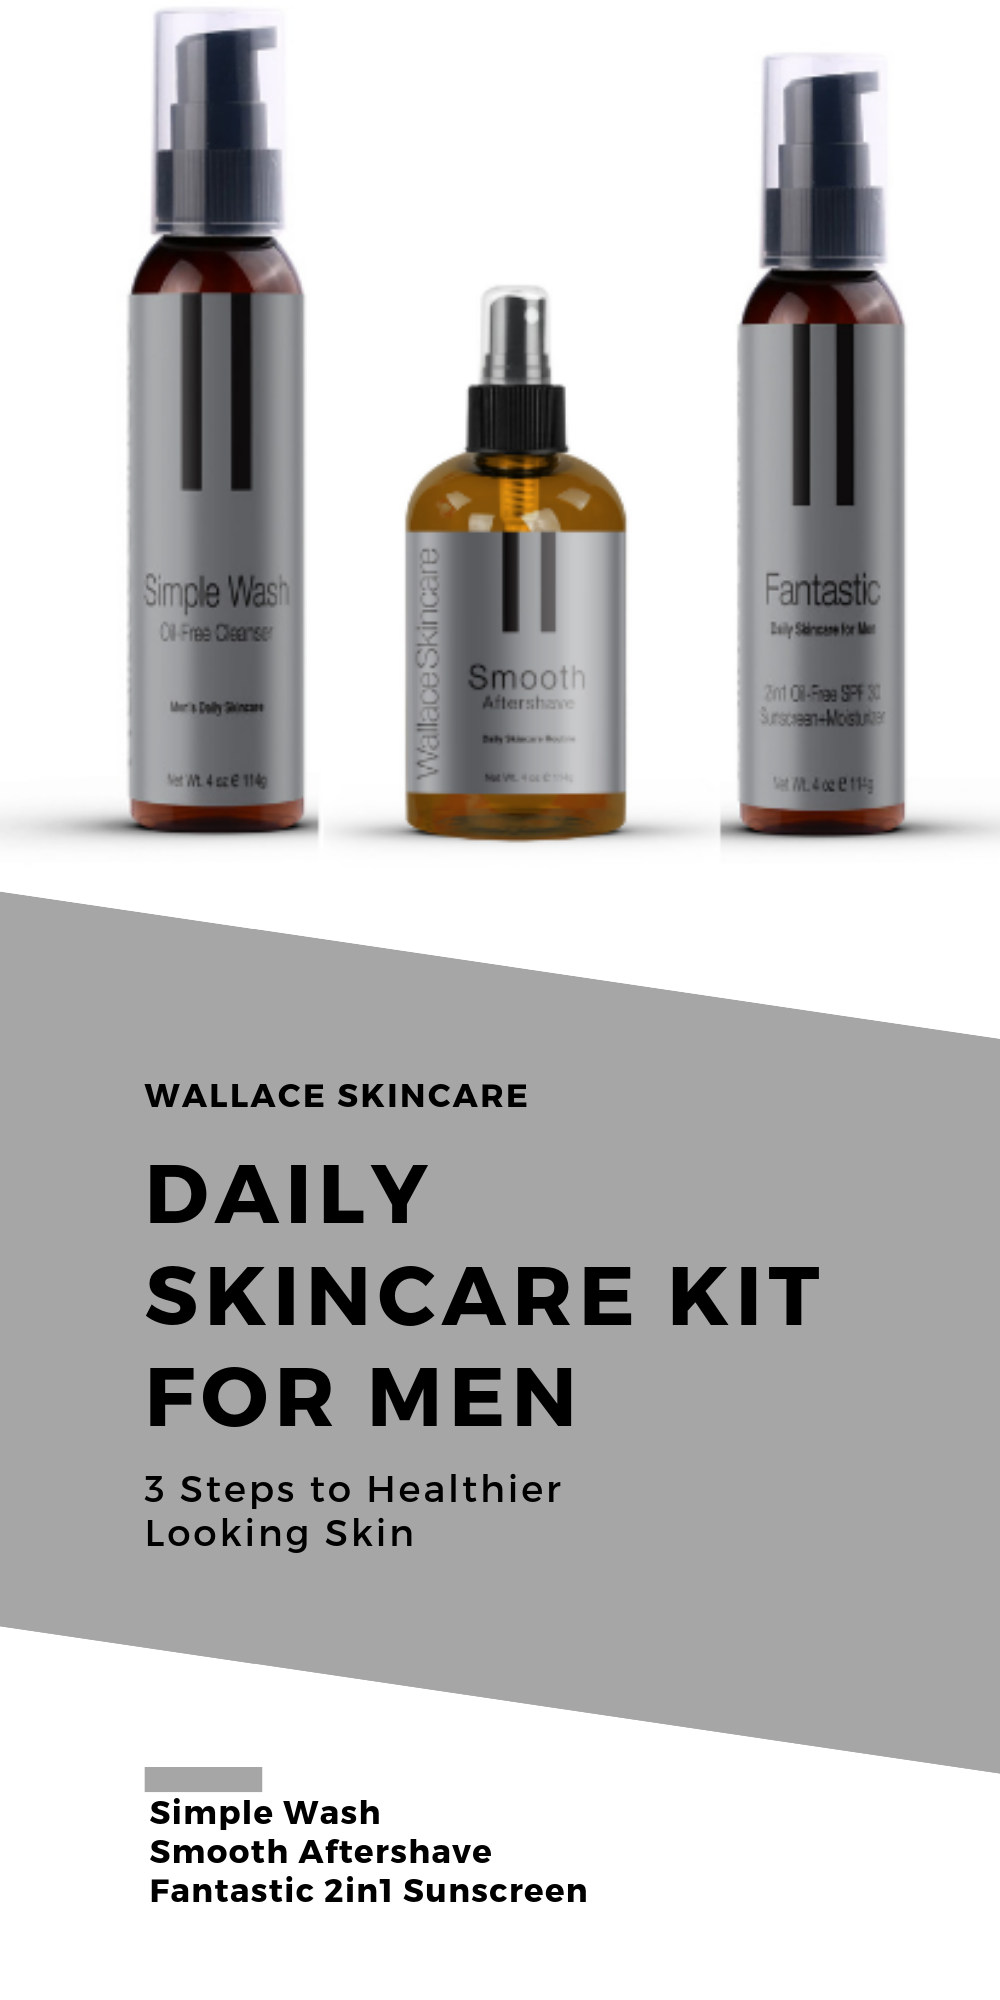 Daily Skincare Kit for Men - Simple Wash, Smooth and Fantastic by Wallace Skincare